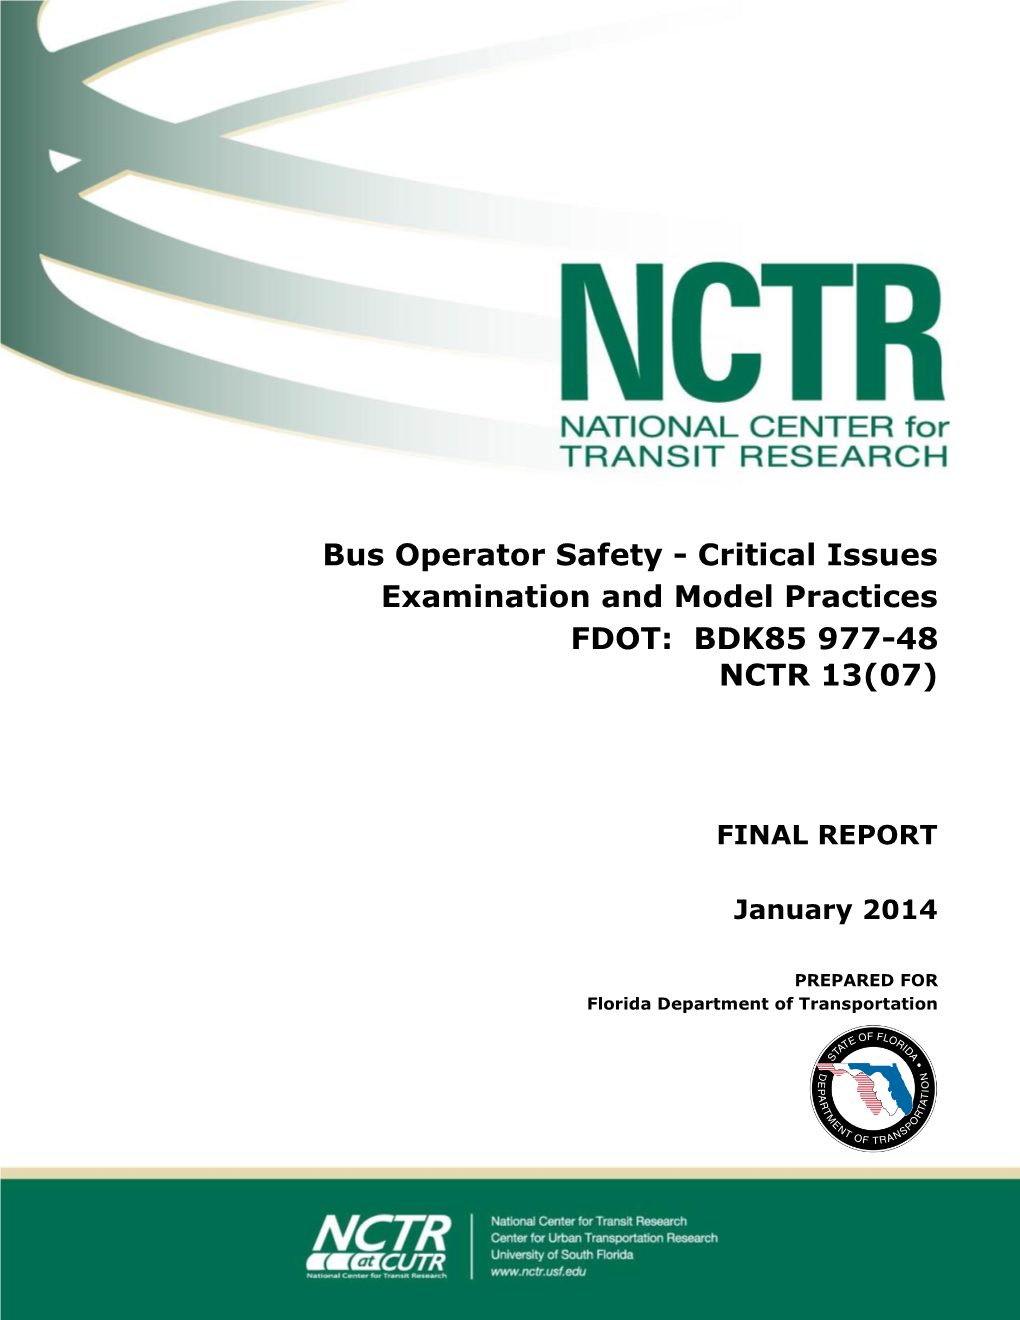 Bus Operator Safety - Critical Issues Examination and Model Practices FDOT: BDK85 977-48 NCTR 13(07)